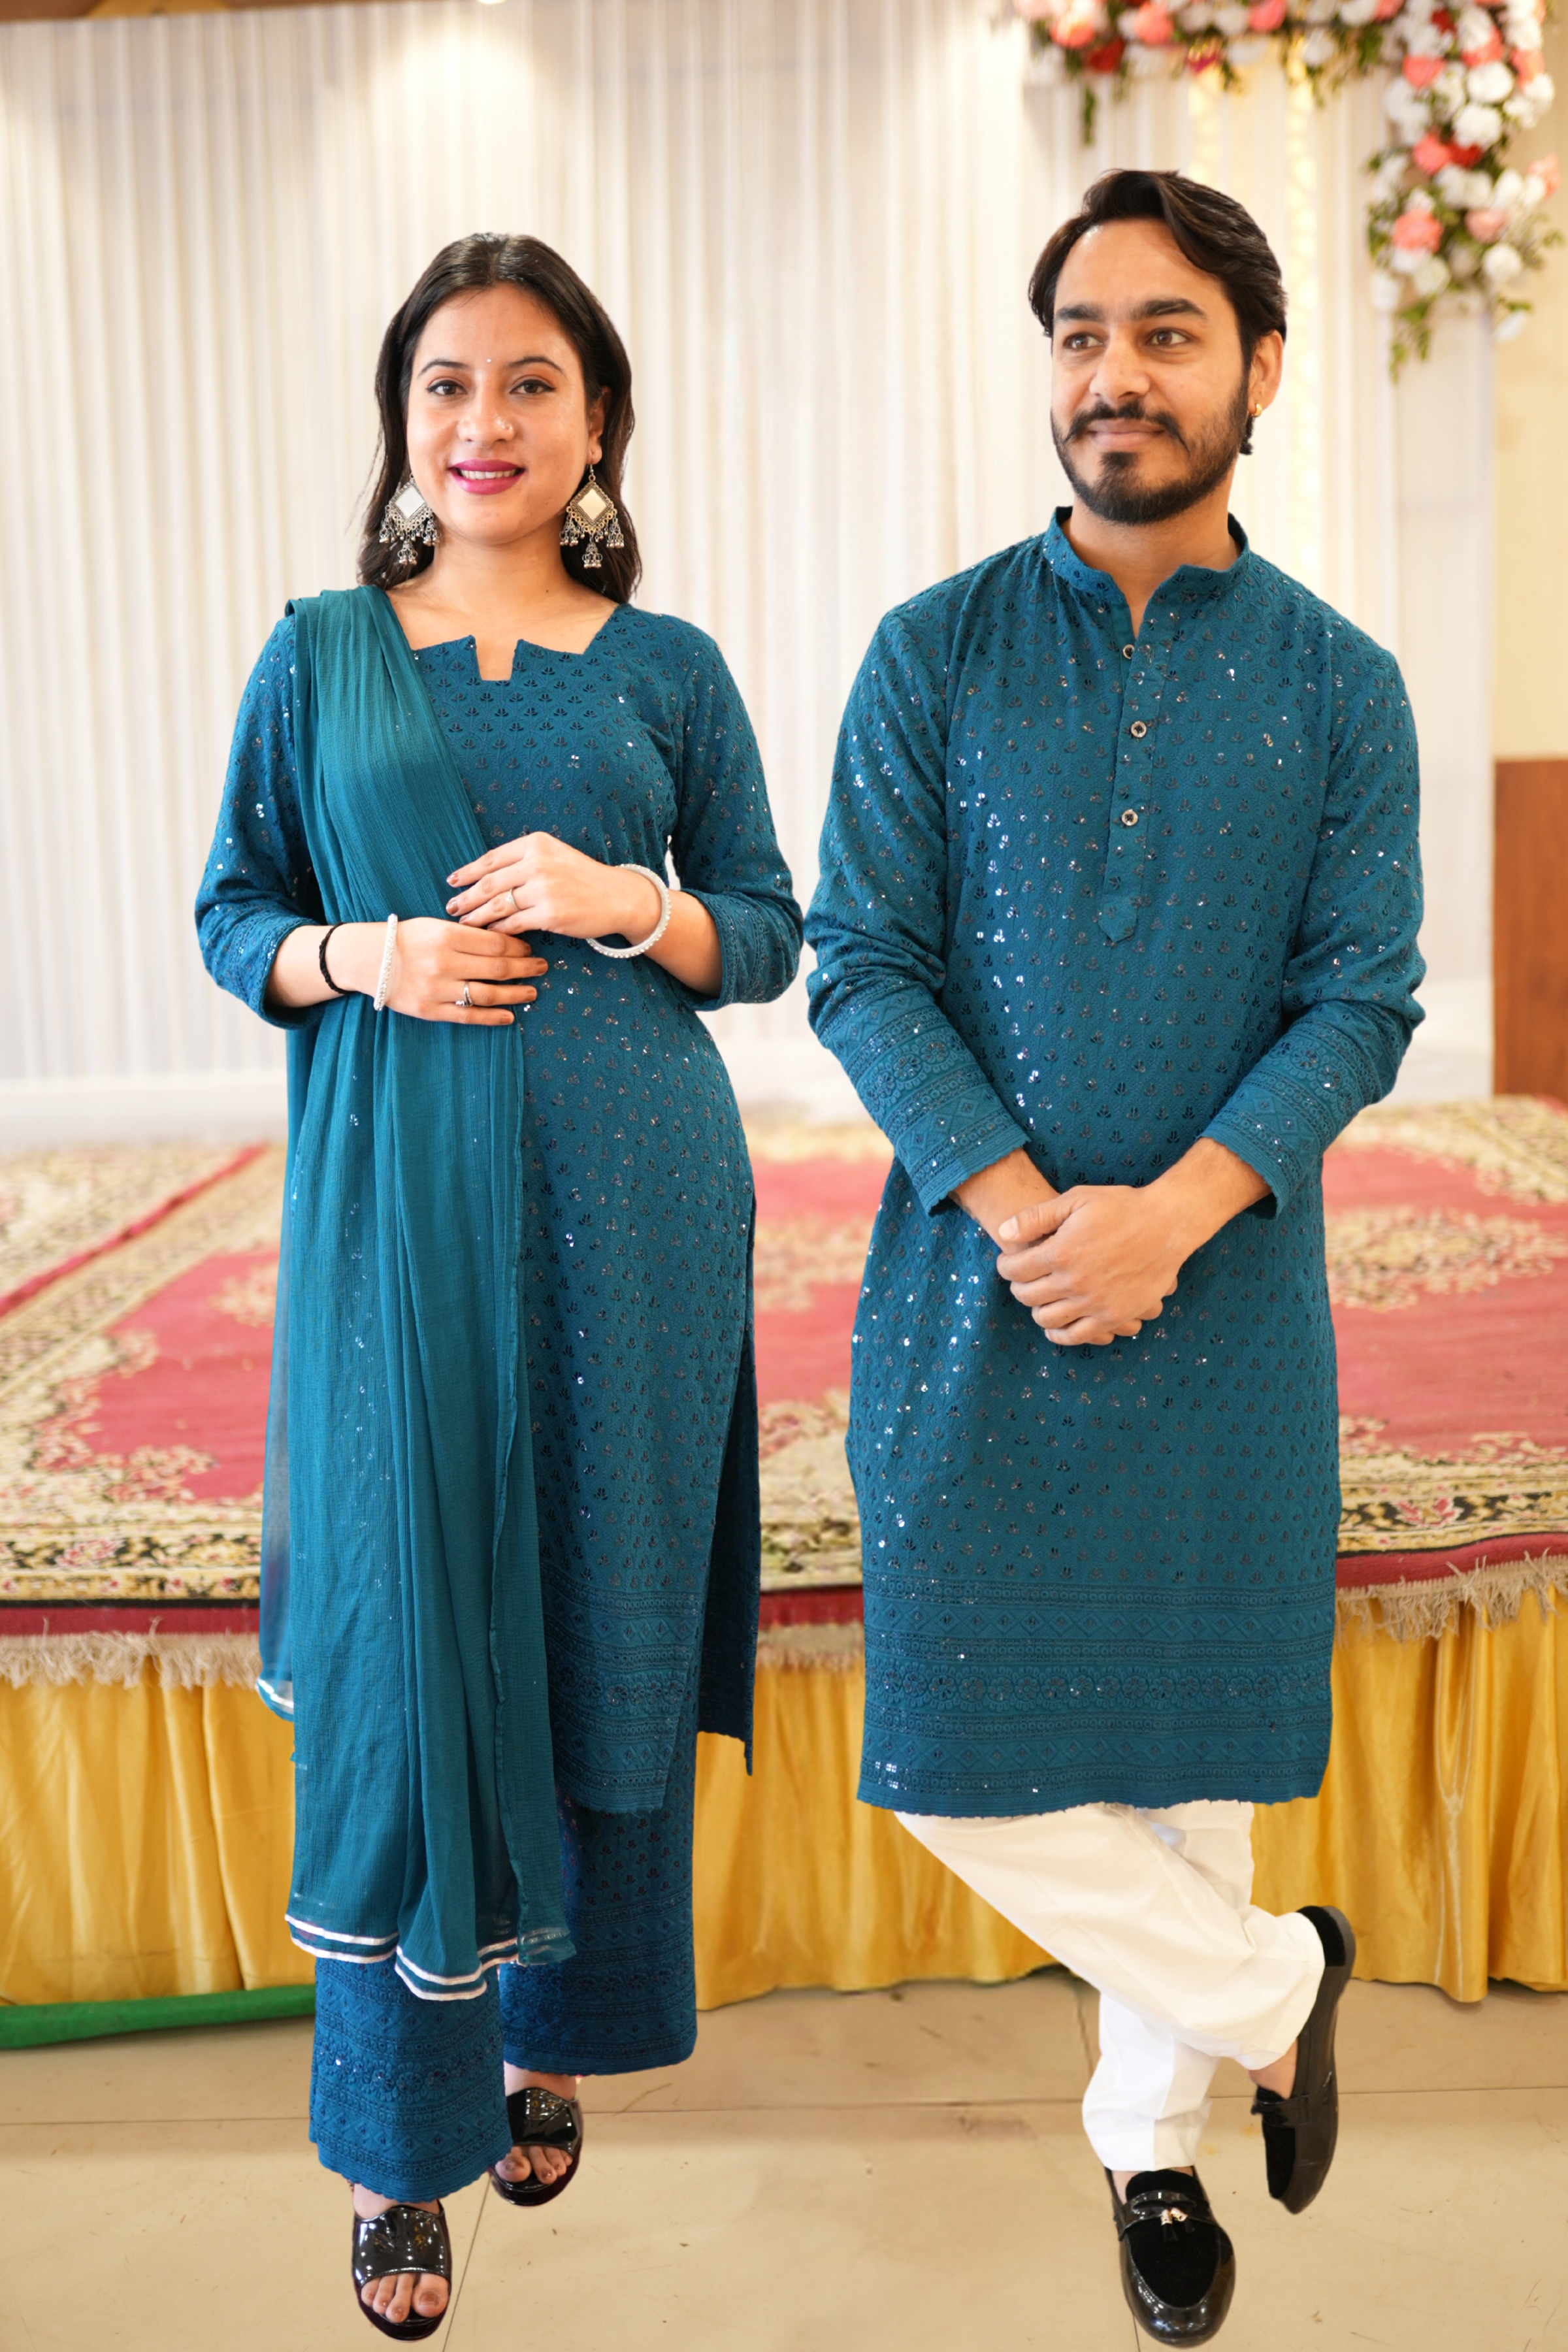 ROYAL COUPLE FANCY COTTON WEAVING STRIPE EMBROIDERY STYLISH PATTERN  EXCLUSIVE ACCESSORIES HANDWORK LATEST DASHING DESIGNER PARTY WEAR READYMADE  DIWALI SPECIAL COUPLE DRESSES COMBO SET BEST SUPPLIER IN INDIA MAURITIUS  USA - Reewaz